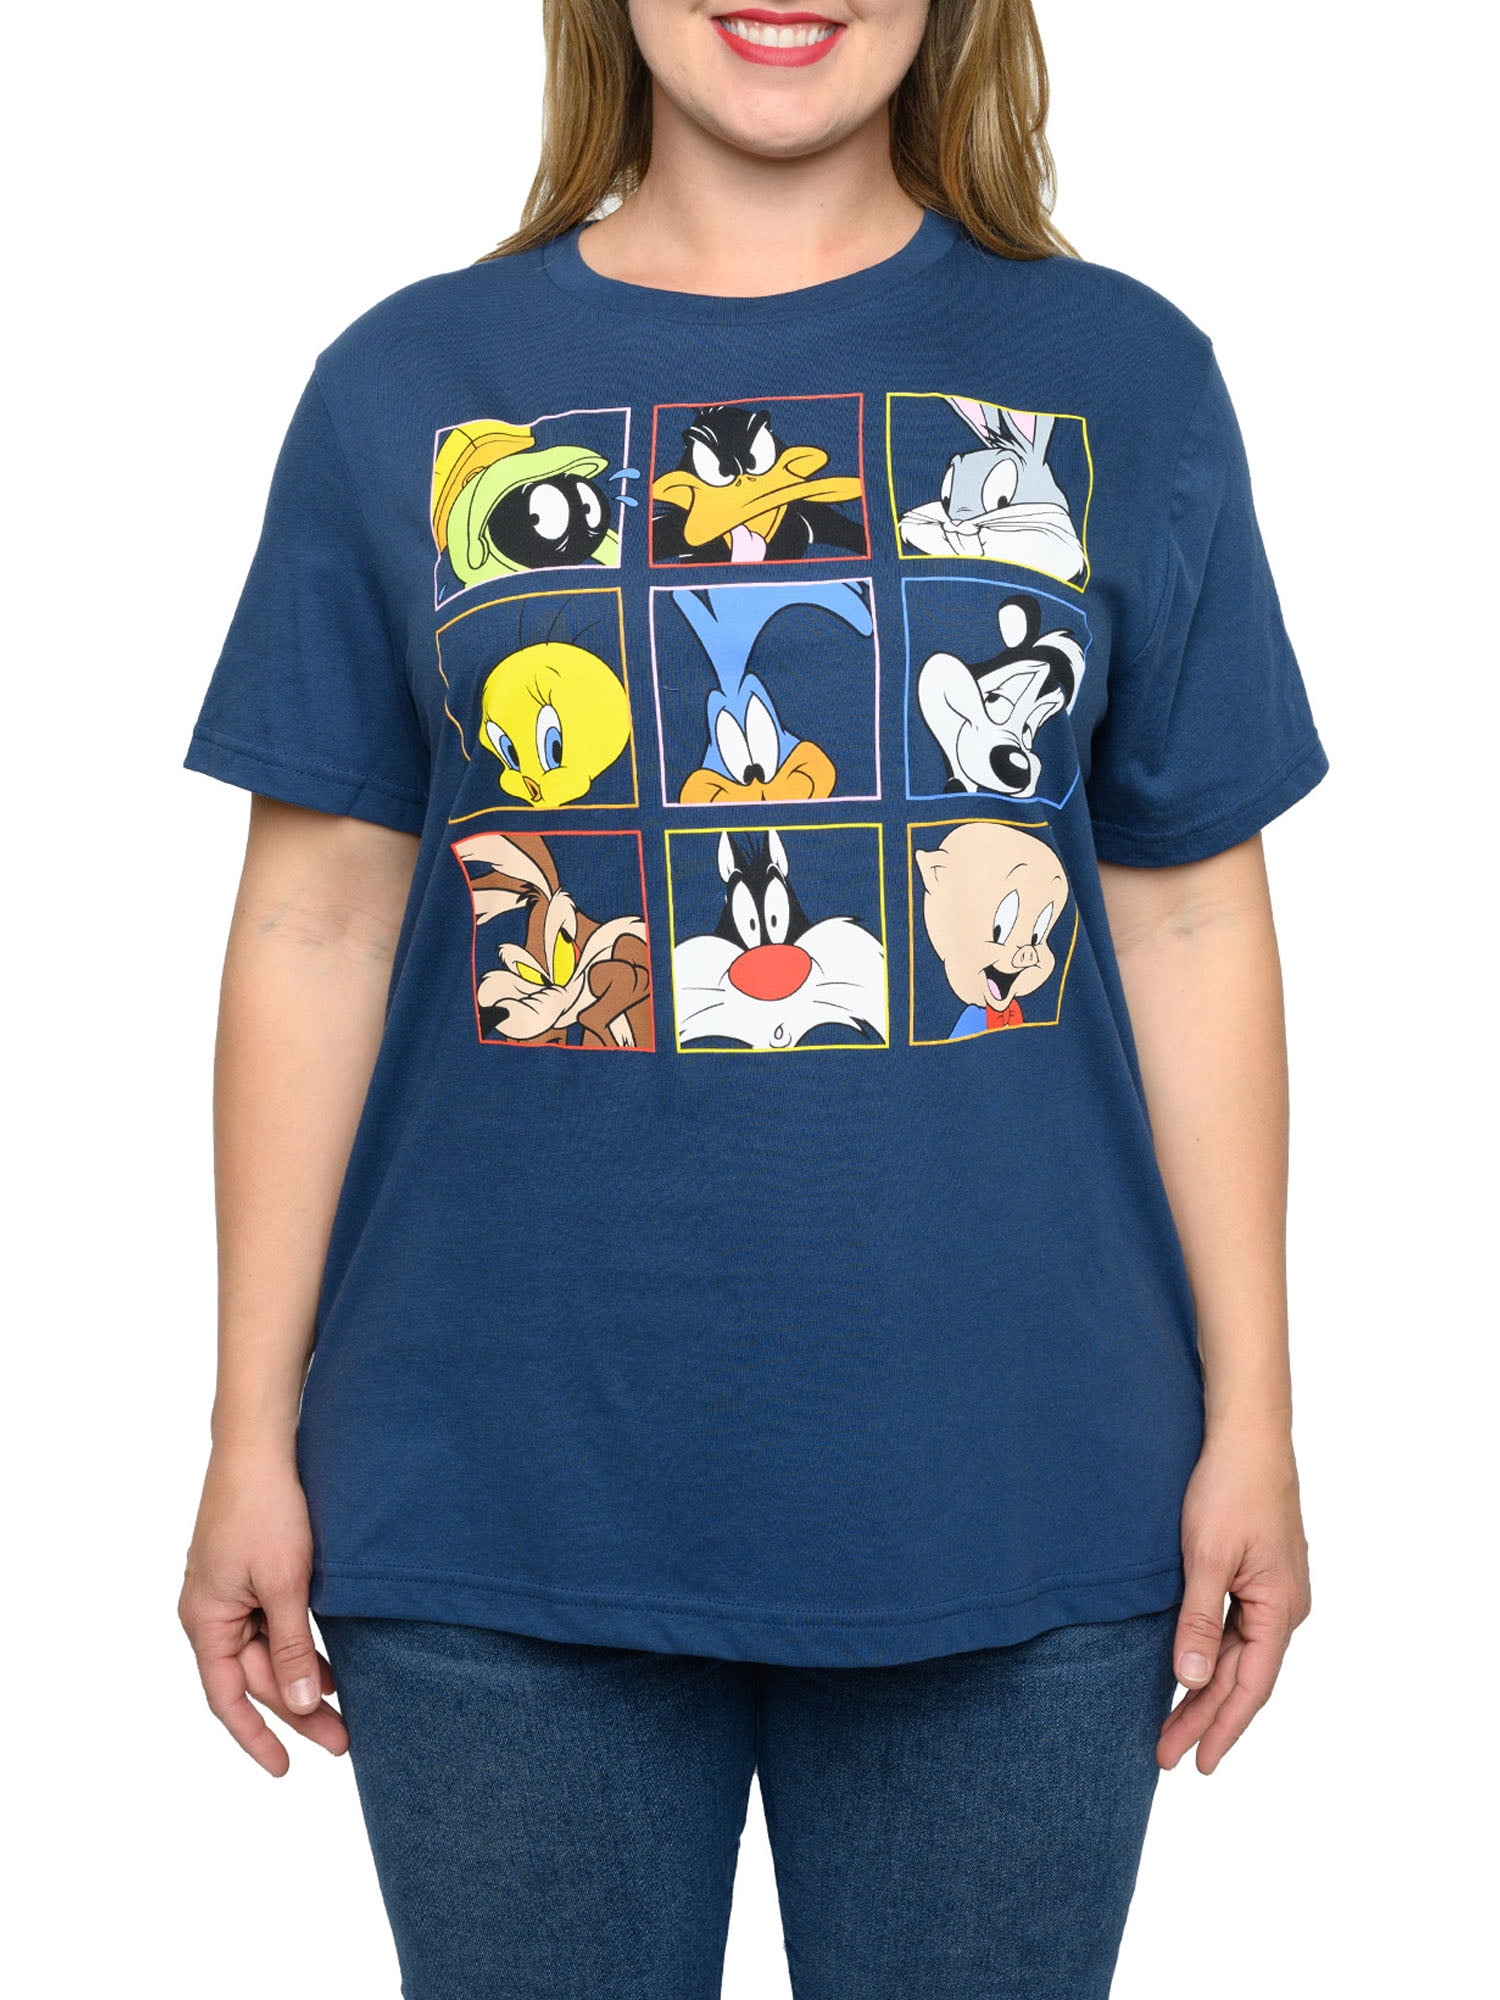 Size Tweety T-Shirt Bunny Sylvester Bugs Daffy Tunes Blue Plus Looney Women\'s